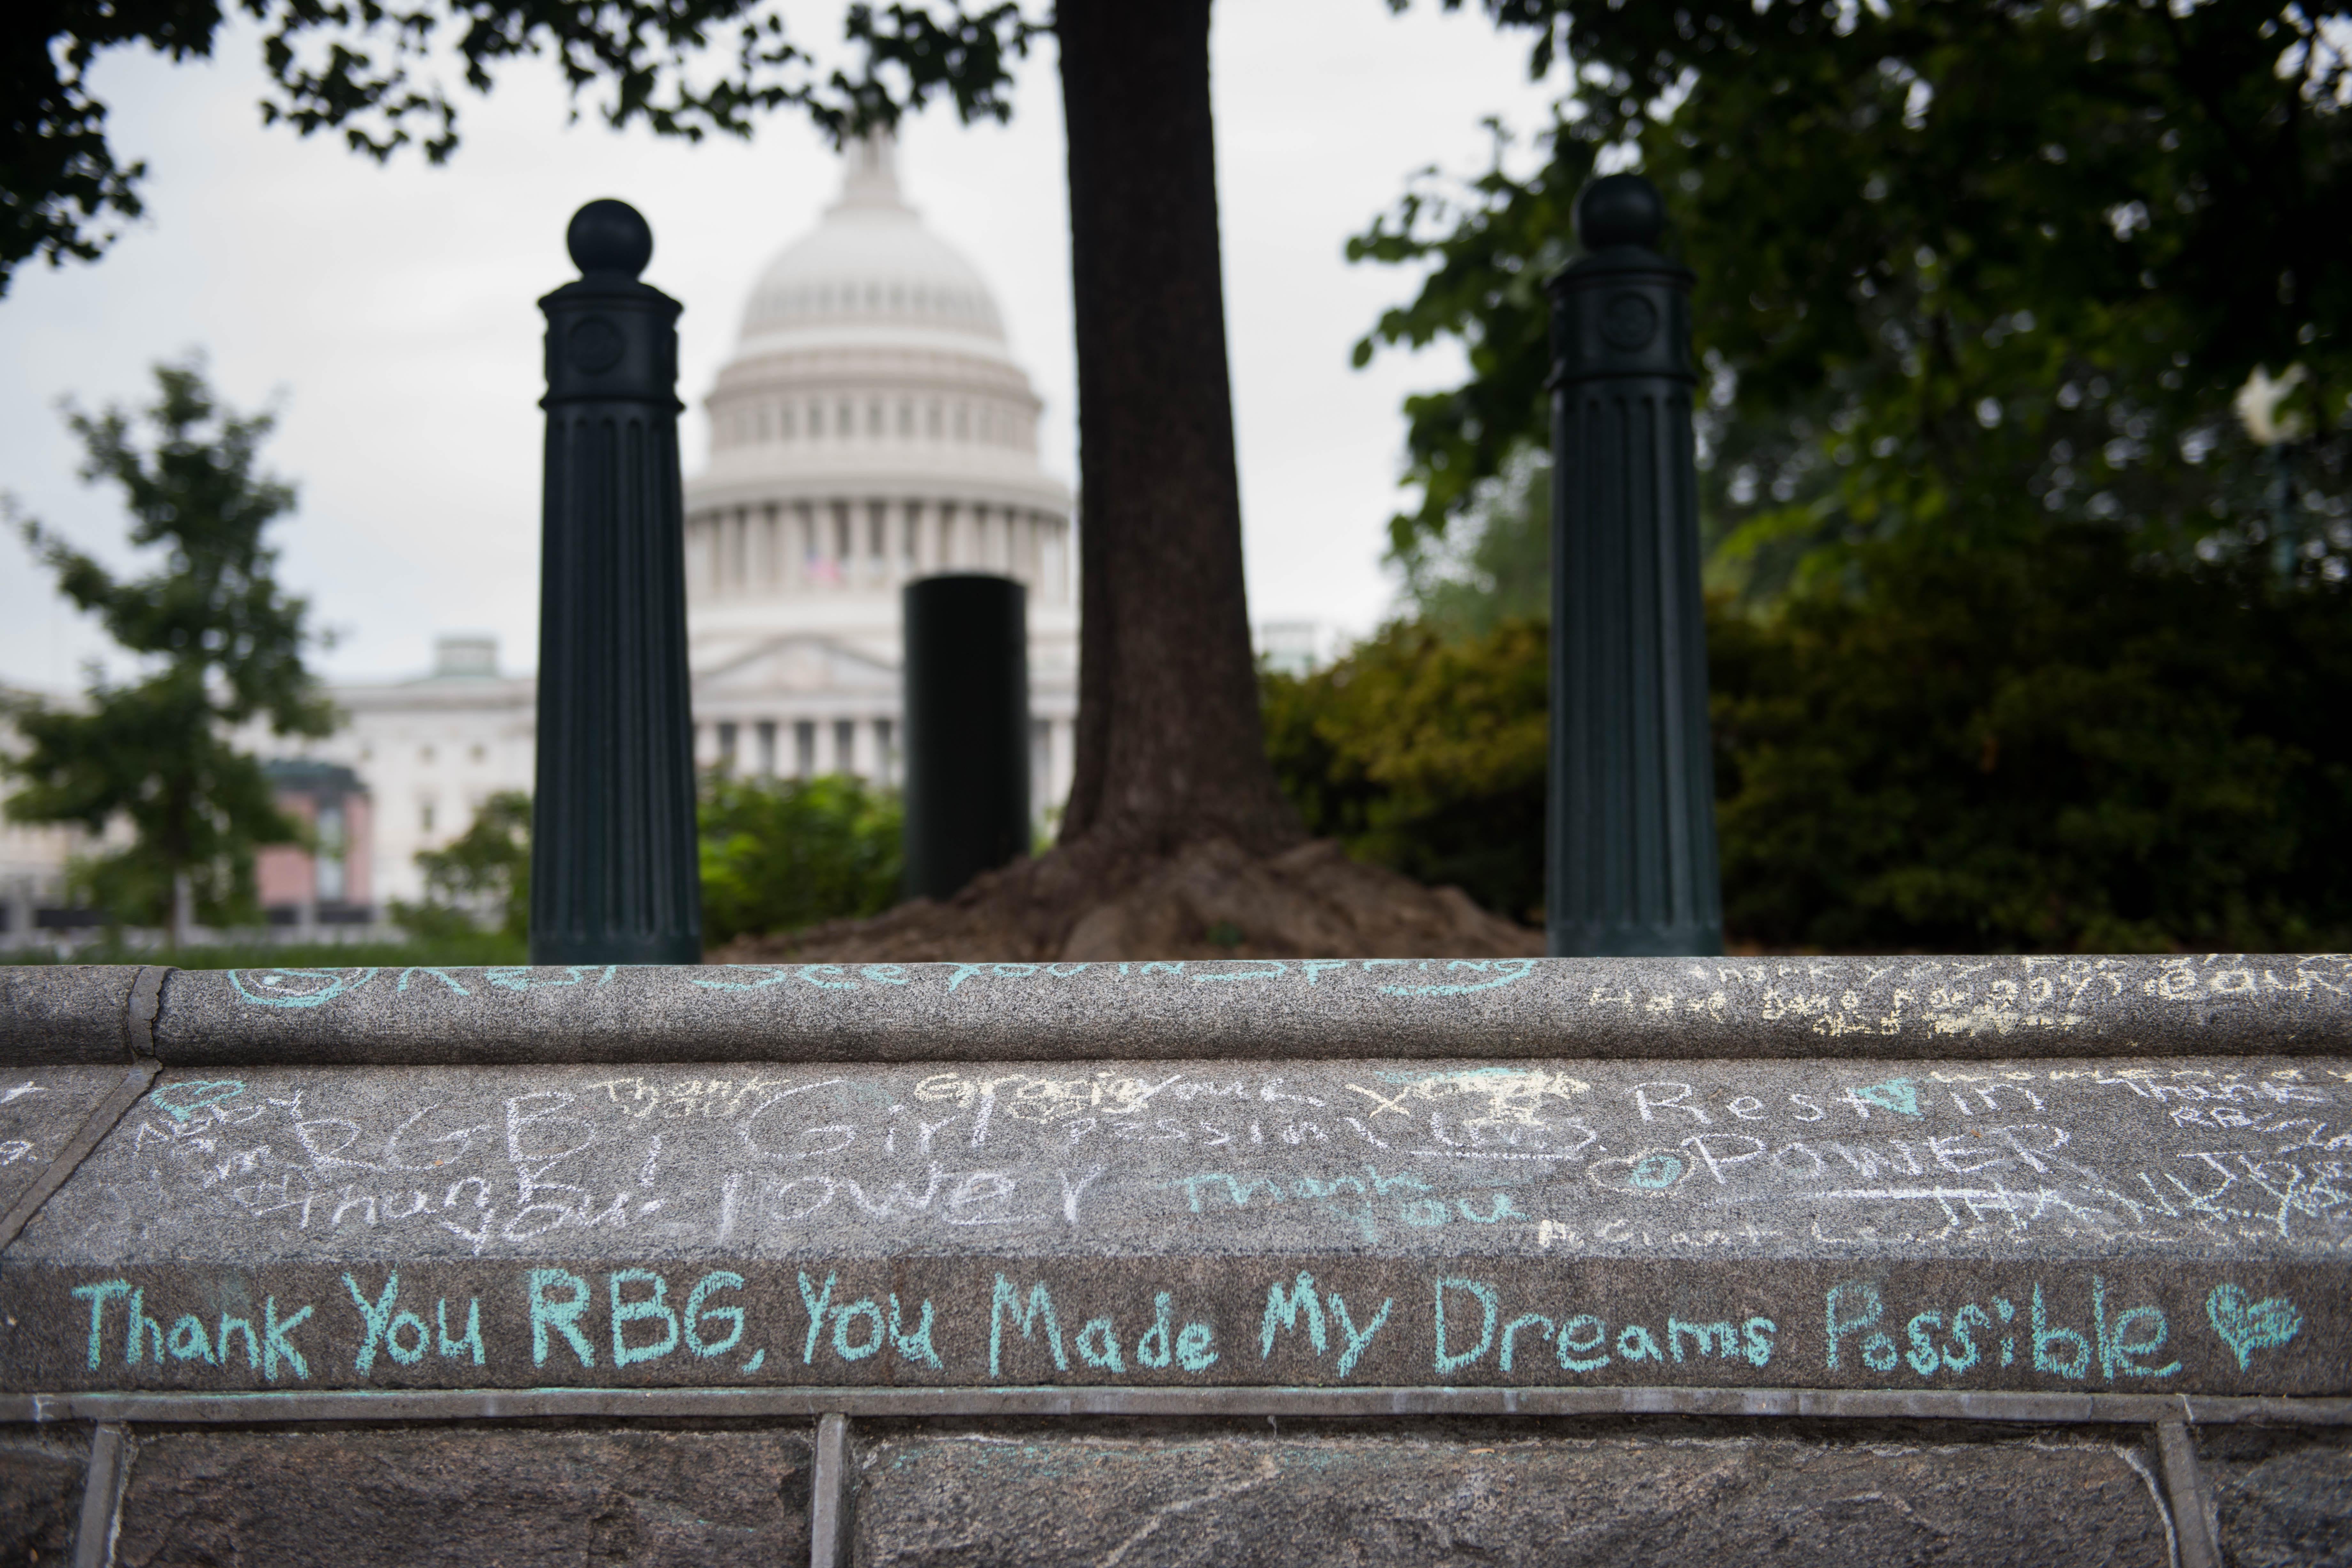 Chalk inscriptions to RBG, including "Thank you RBG, you made my dreams possible" are seen on a wall near the Capitol.